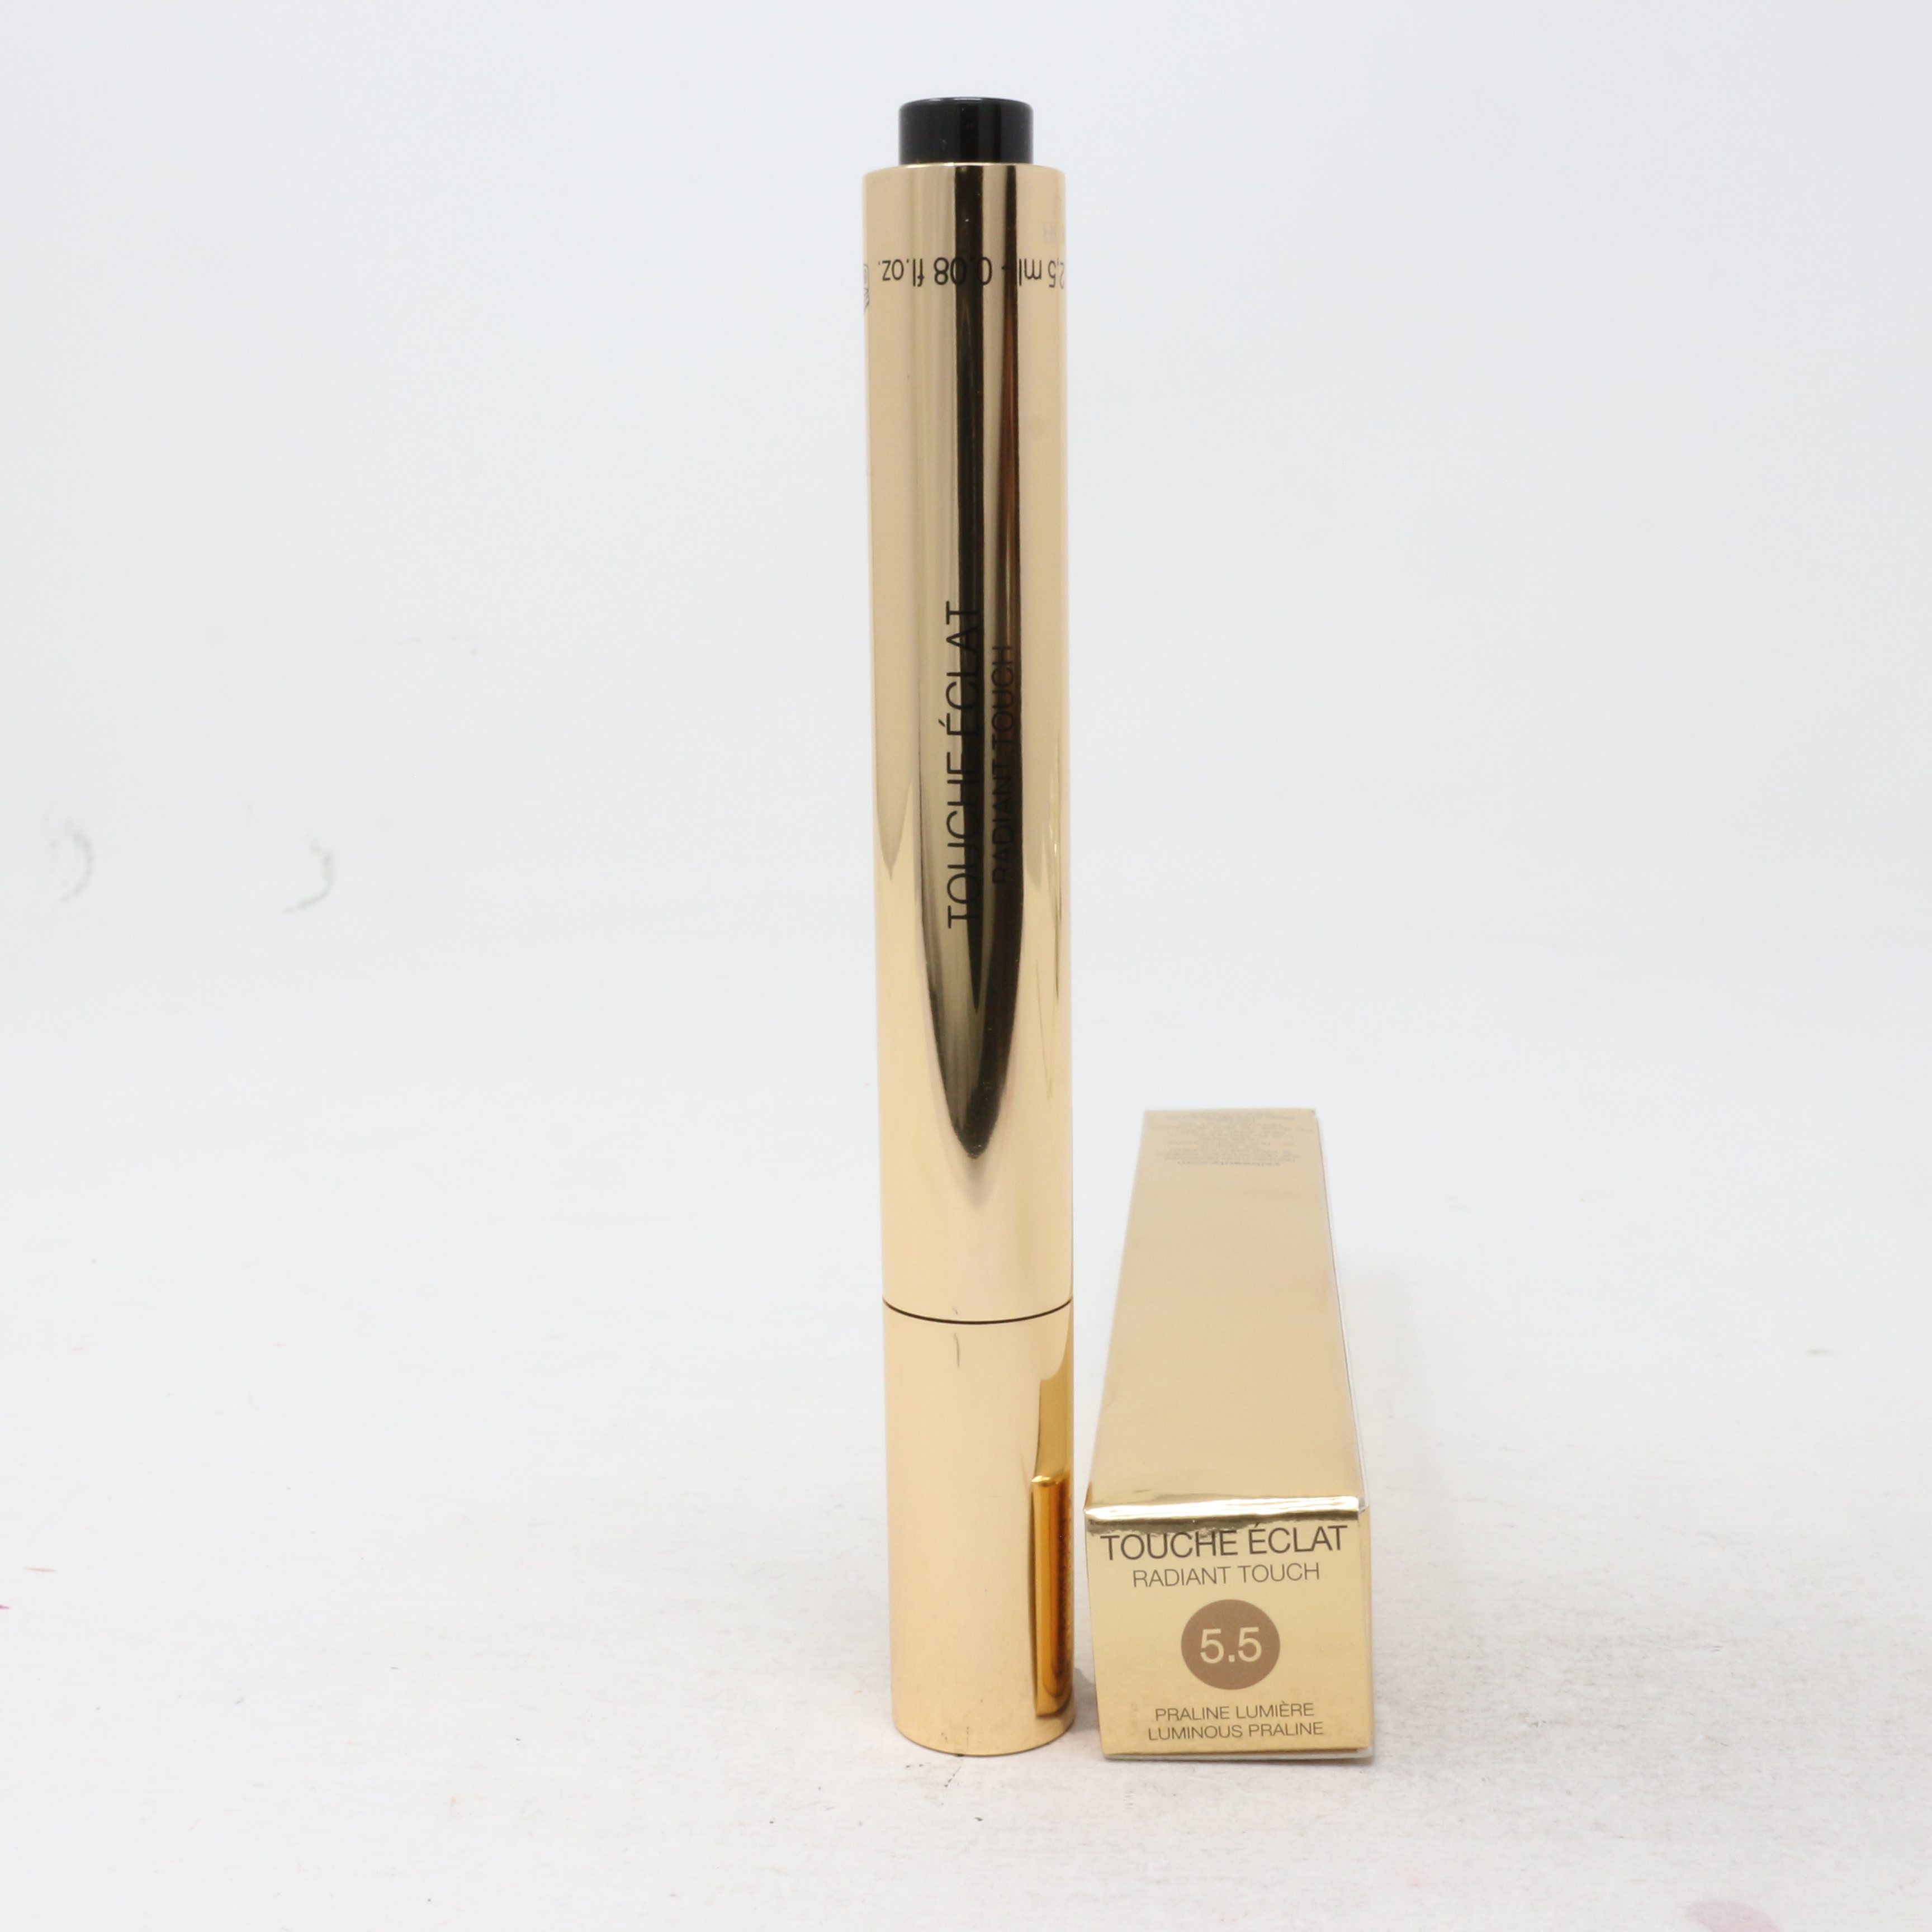 YSL's Touche Éclat Brightening Pen Is Better Than the Blur Tool